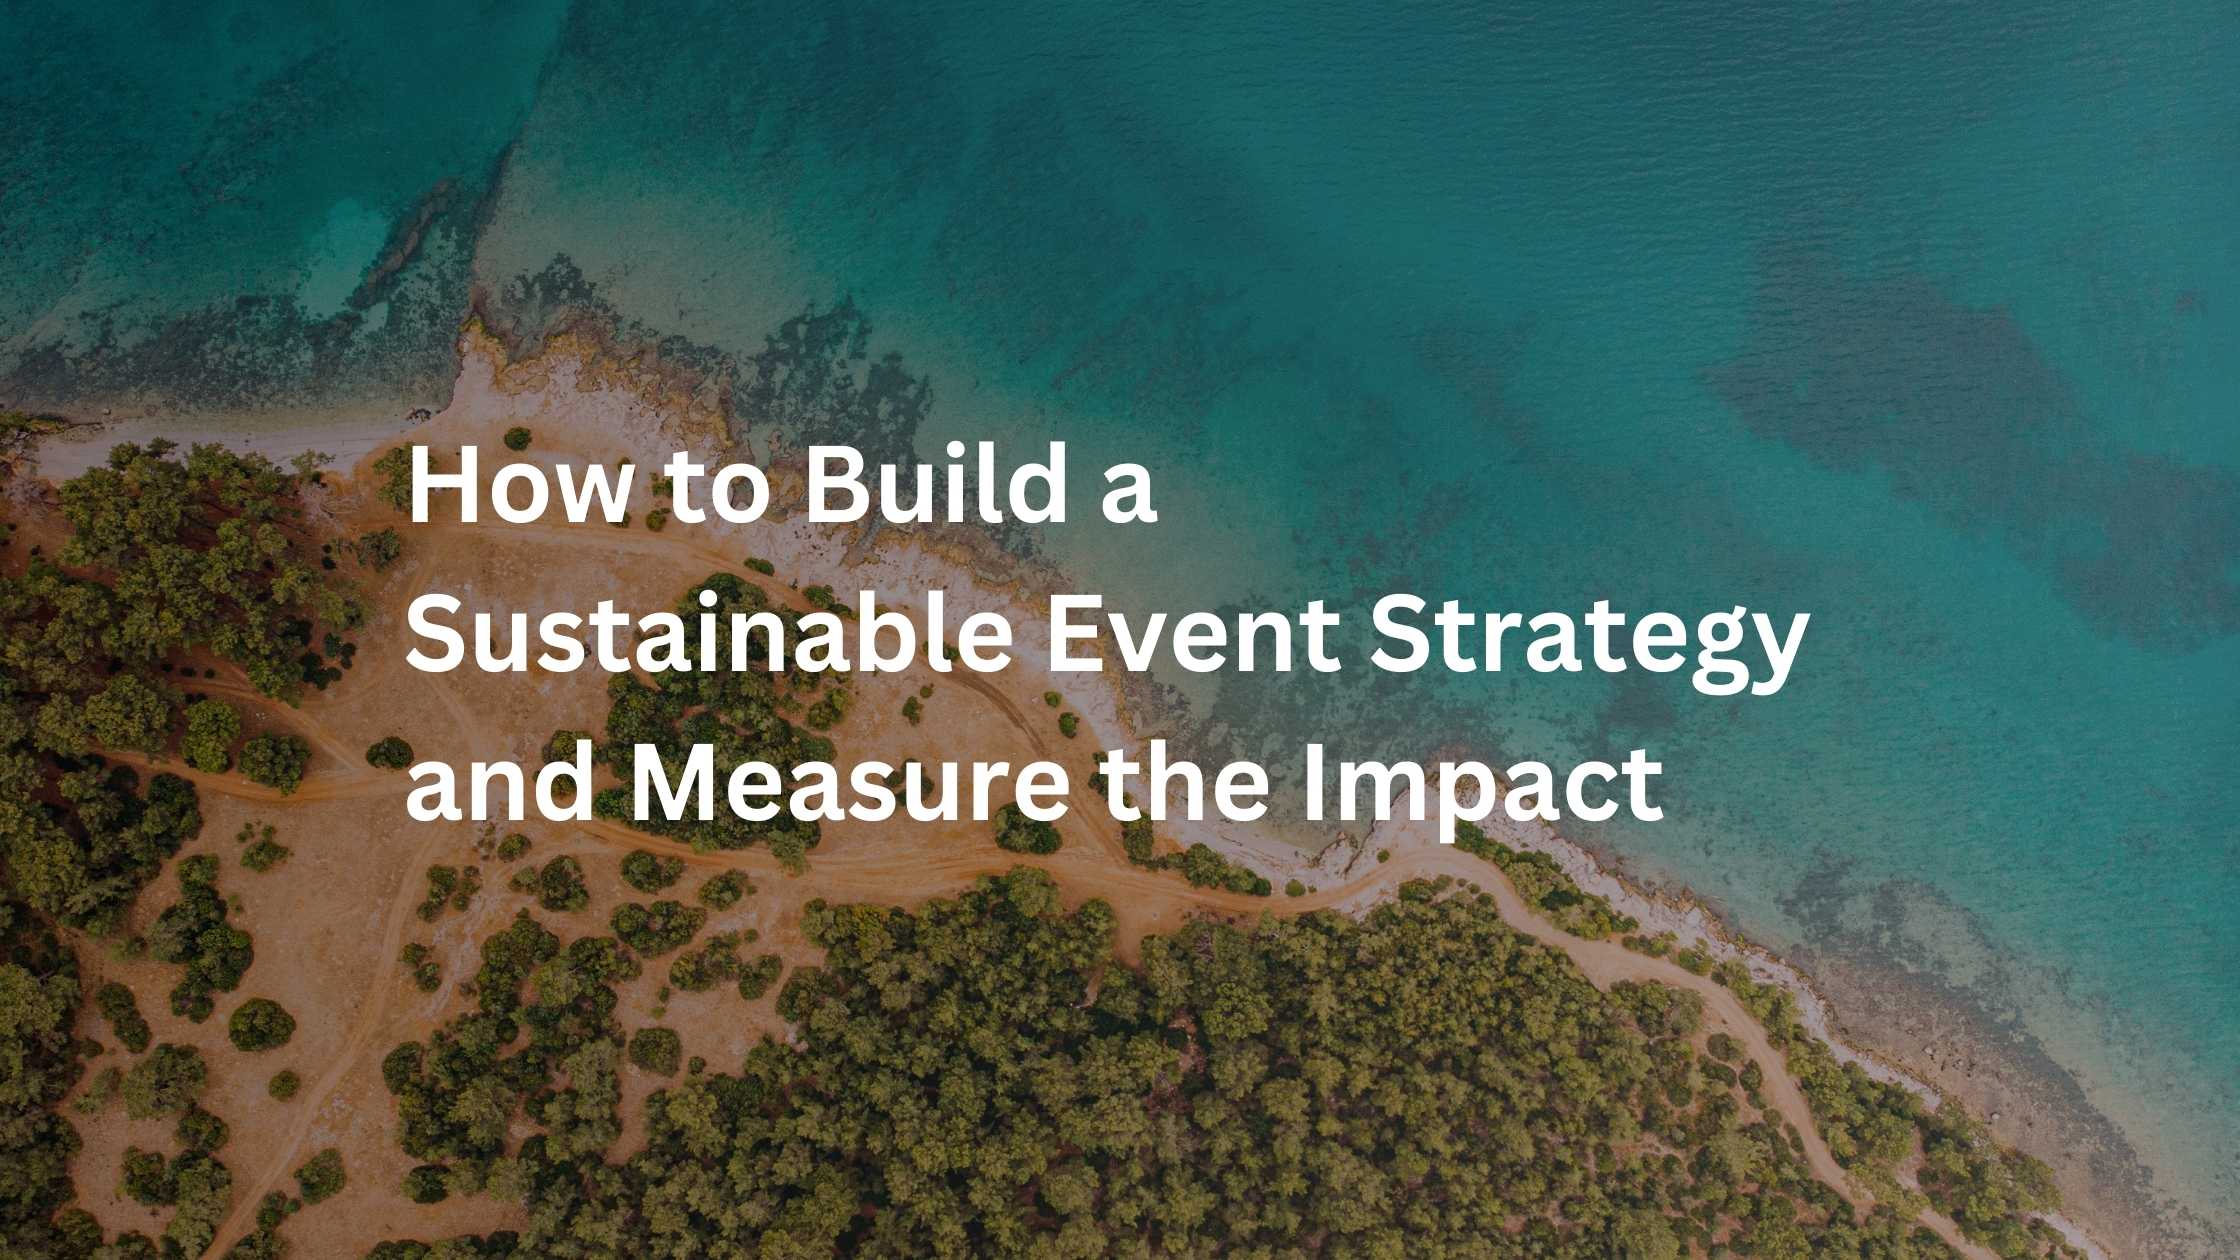 How to Build a Sustainable Event Strategy and Measure the Impact